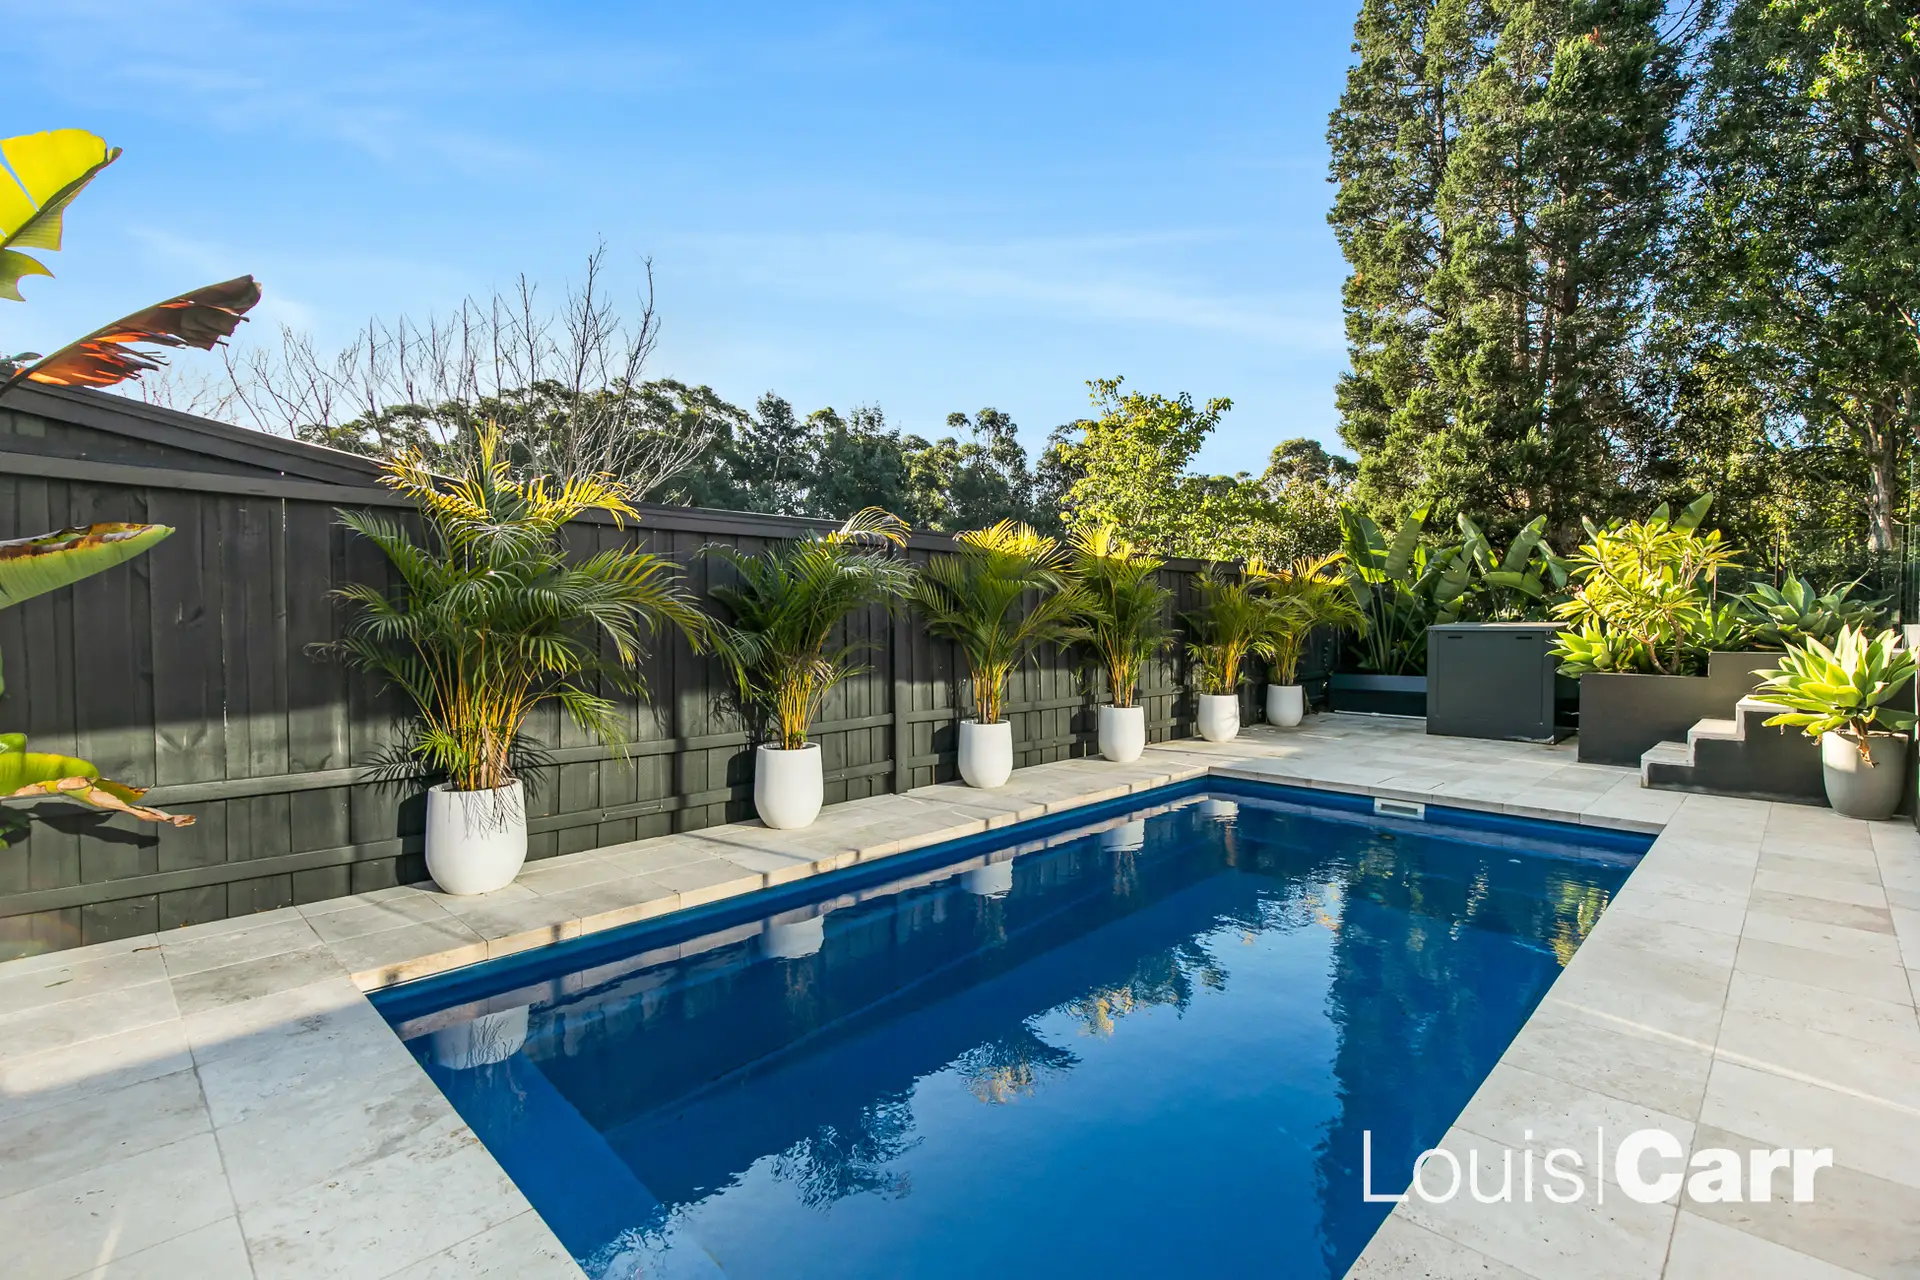 Photo #9: 216 Shepherds Drive, Cherrybrook - Sold by Louis Carr Real Estate